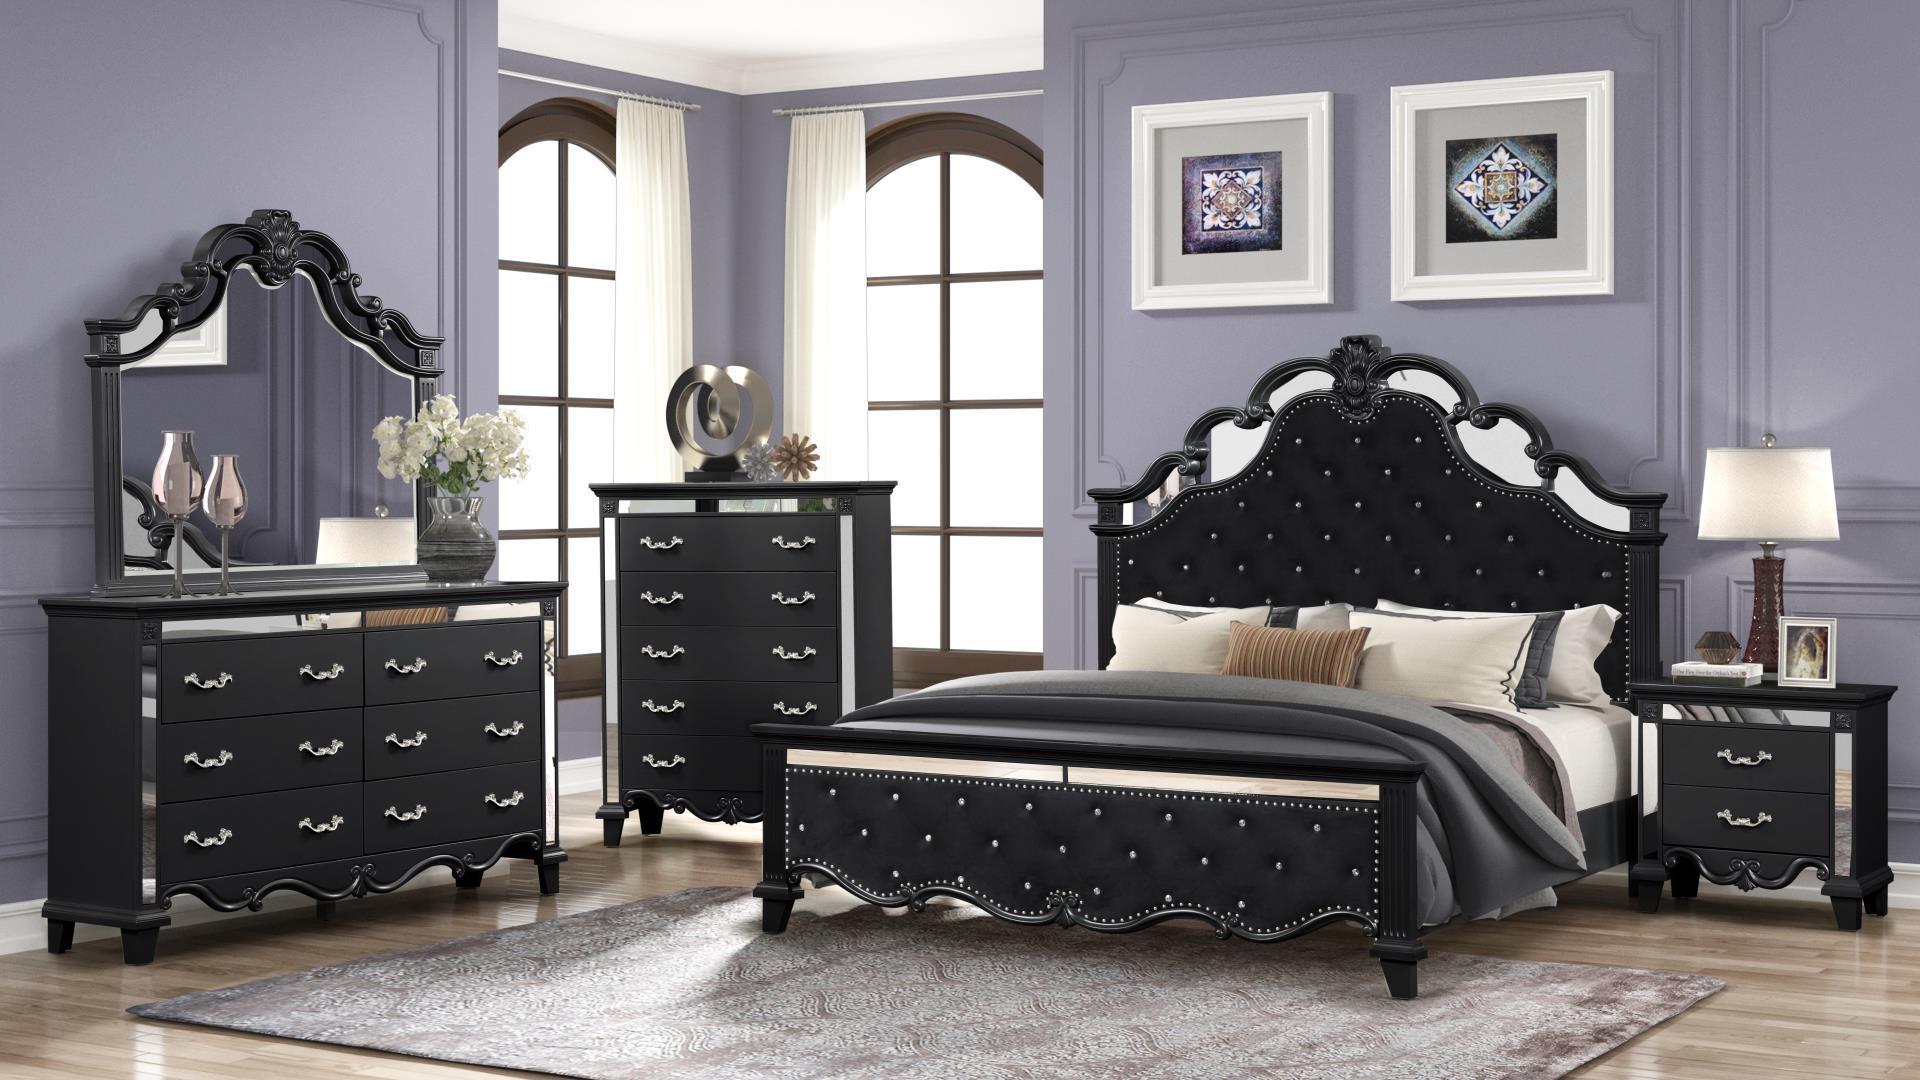 

    
Glam Black Tufted Queen Bedroom Set 4P MILAN Galaxy Home Contemporary Modern
